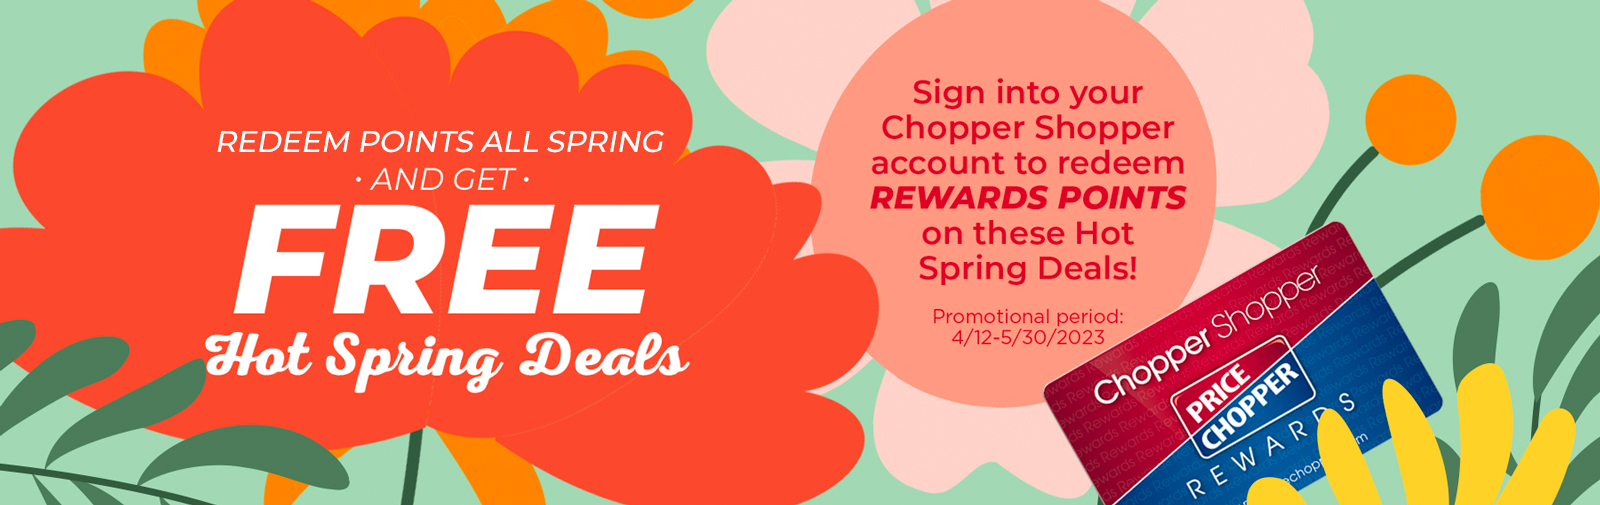 Sign into your Chopper Shopper account to redeem REWARDS POINTS on these Hot Spring Deals